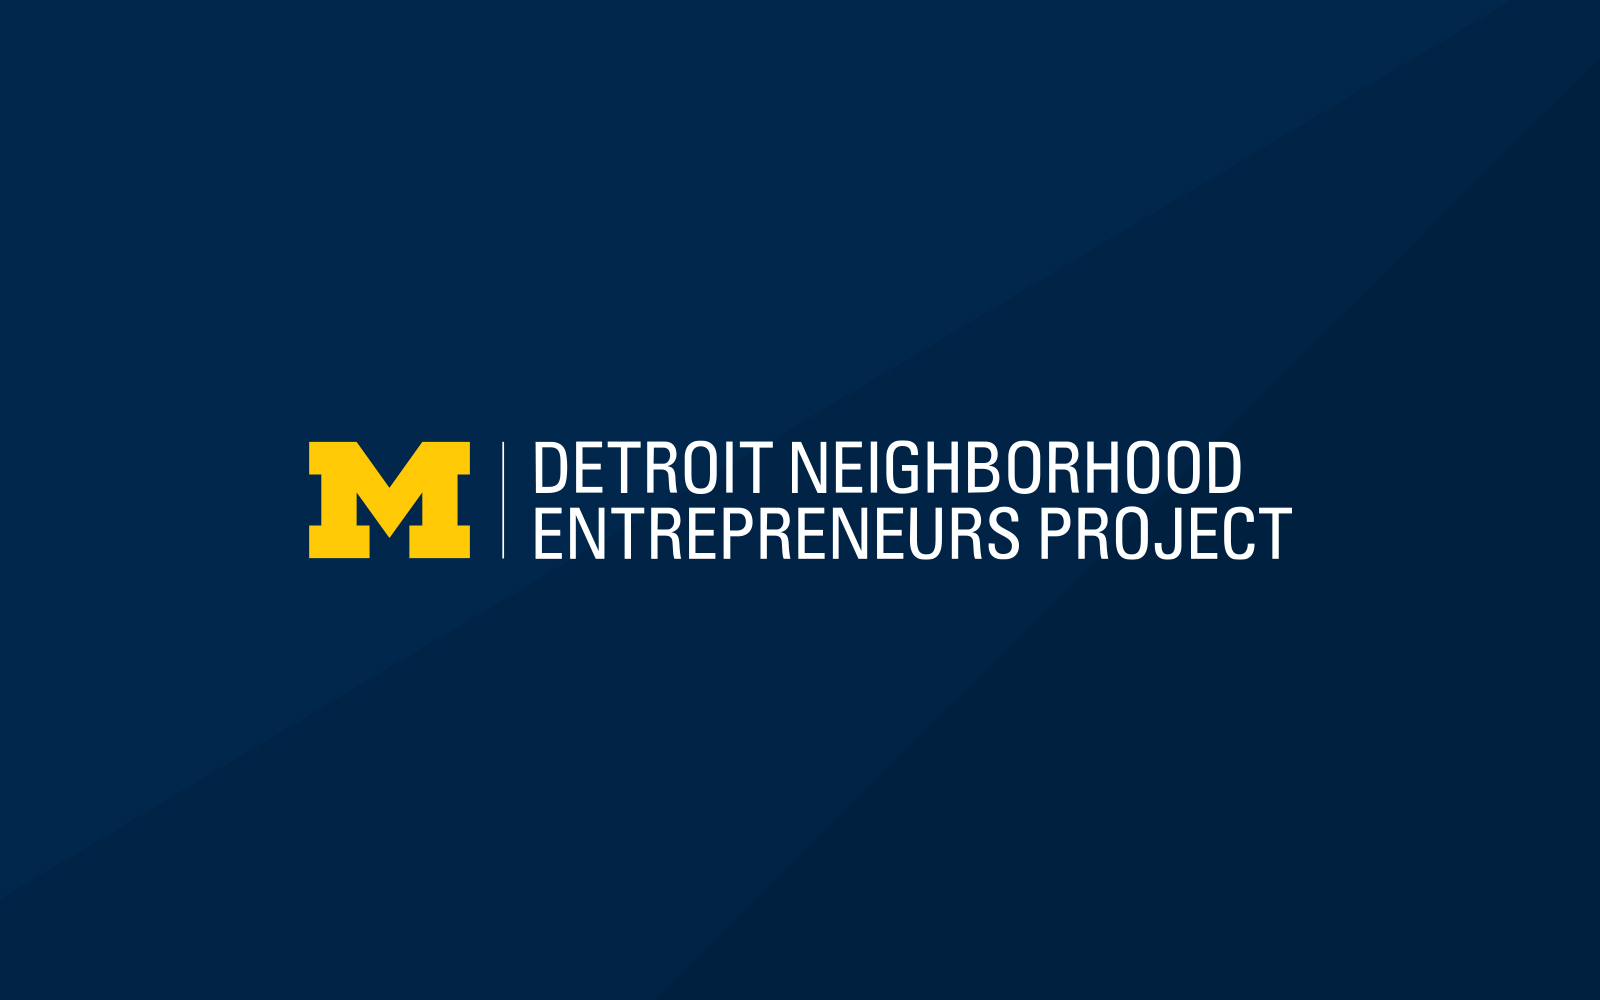 "Detroit Neighborhood Entrepreneurs Project" logo in maize and white on a blue background